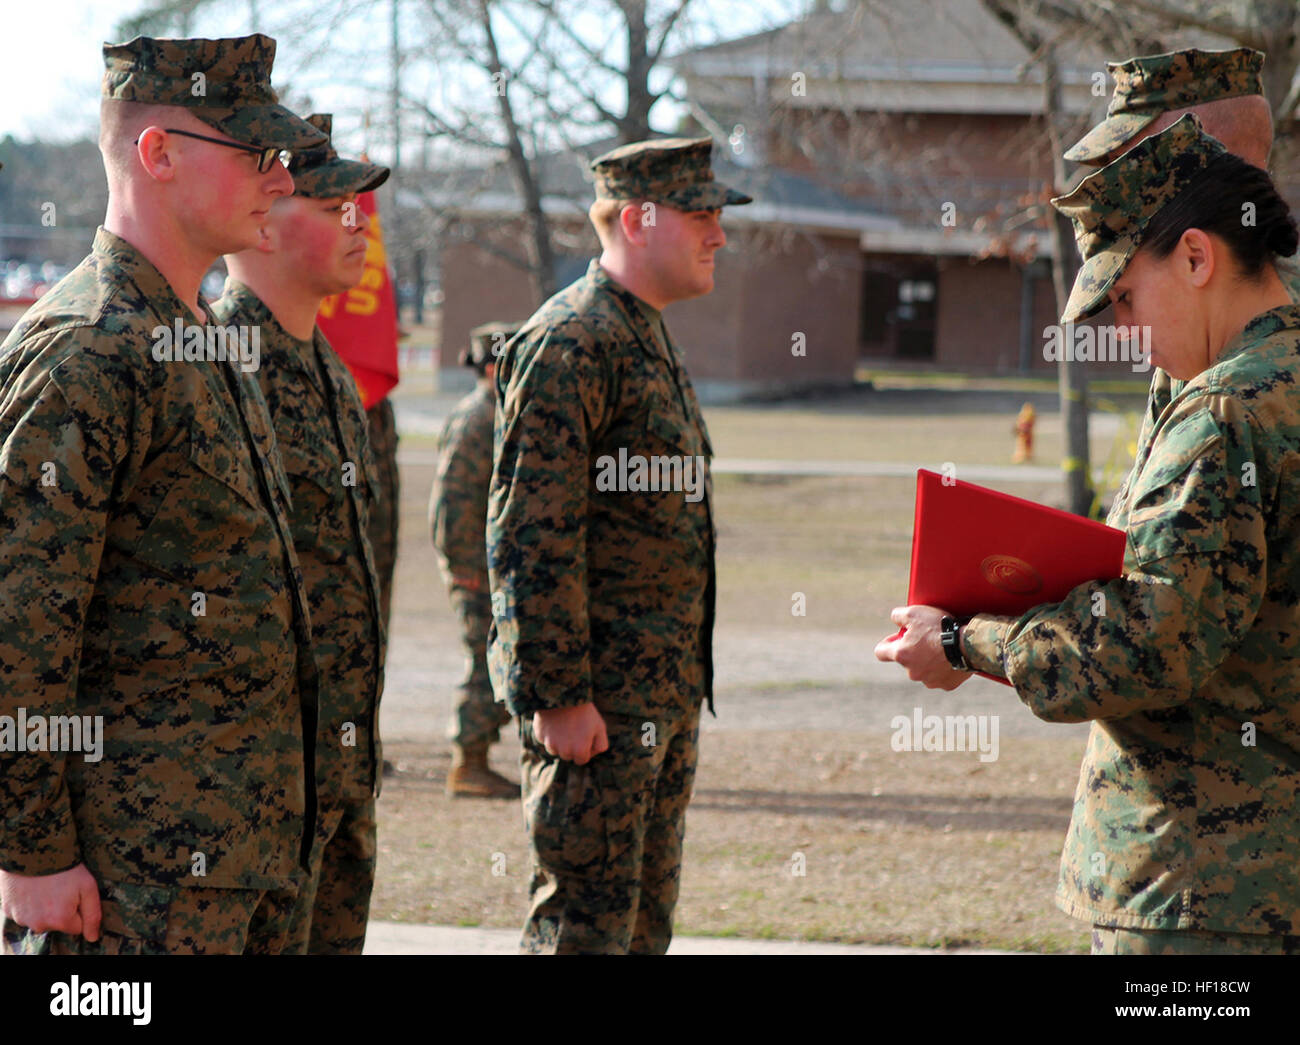 Sgt. Jeremy Moses (far left), Cpl. Myles Bayer (left center) and Lance Cpl. Adam Dwaileebe (center), all motor transportation operators with Transportation and Support Company, Combat Logistics Battalion 2, 2nd Marine Logistics Group, stand at attention in front of Lt. Col. William Stophel (far right), the commanding officer of CLB-2 and Sgt. Maj. Charmalyn Pile, the battalion sergeant major, during a Purple Heart Medal ceremony aboard Camp Lejeune, N.C., Feb. 7, 2014.  The three Marines were awarded the Purple Heart for wounds suffered in action while deployed in support of Operation Enduring Stock Photo